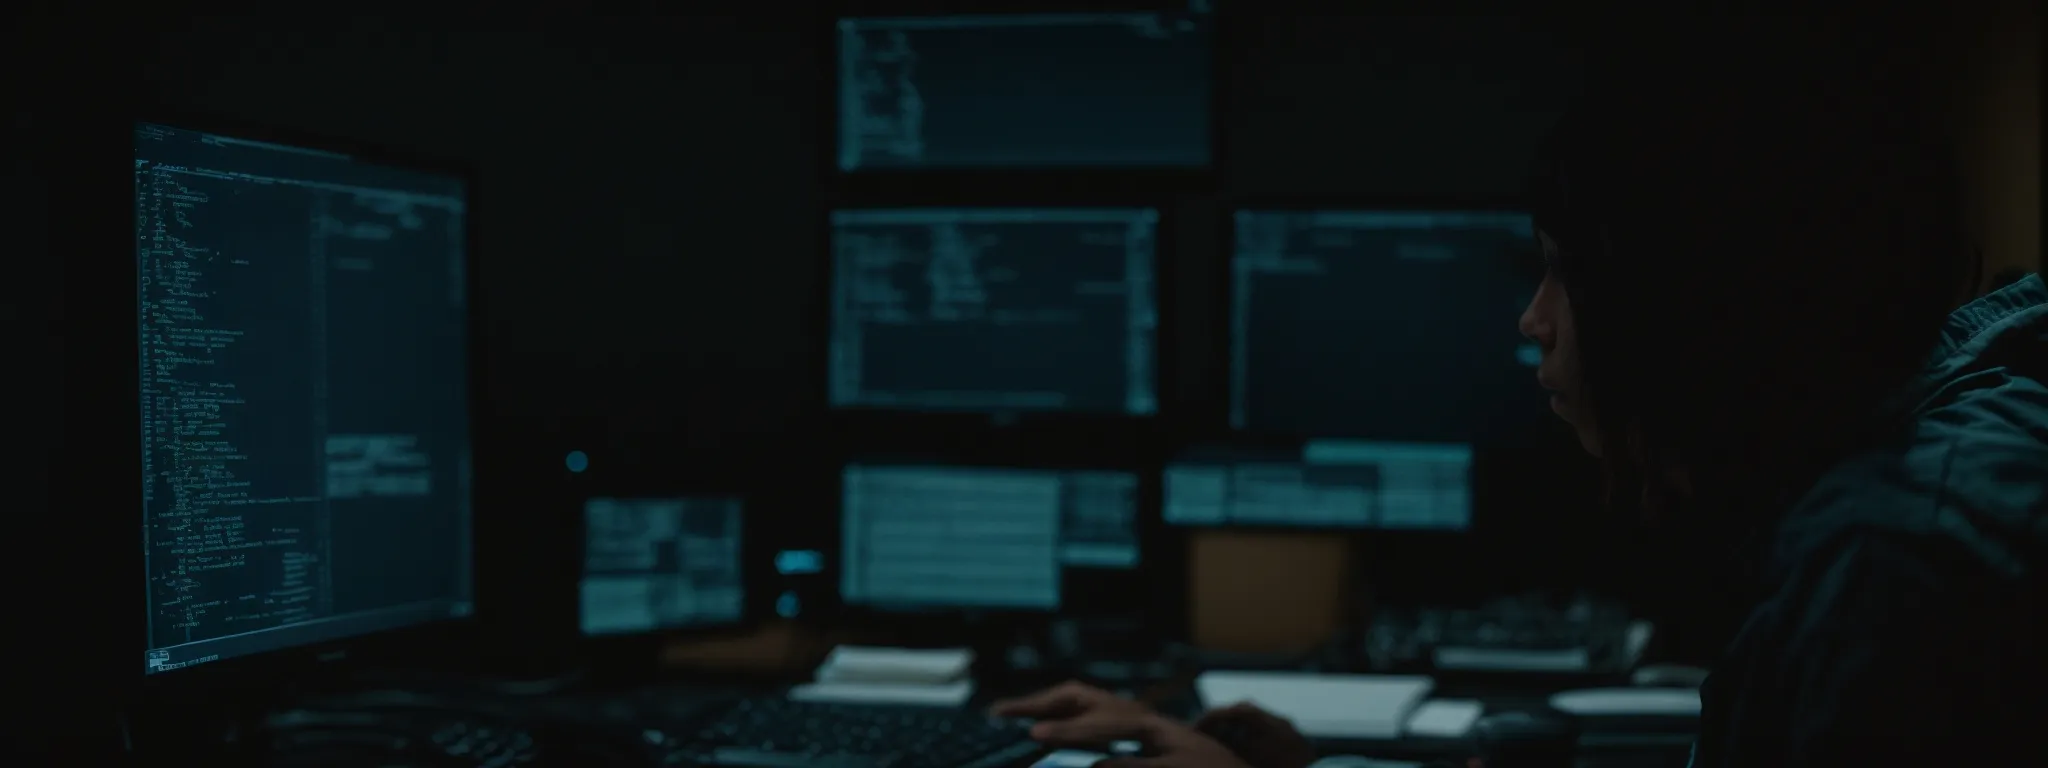 a programmer intently scrutinizes code on a computer screen in a dimly lit office.